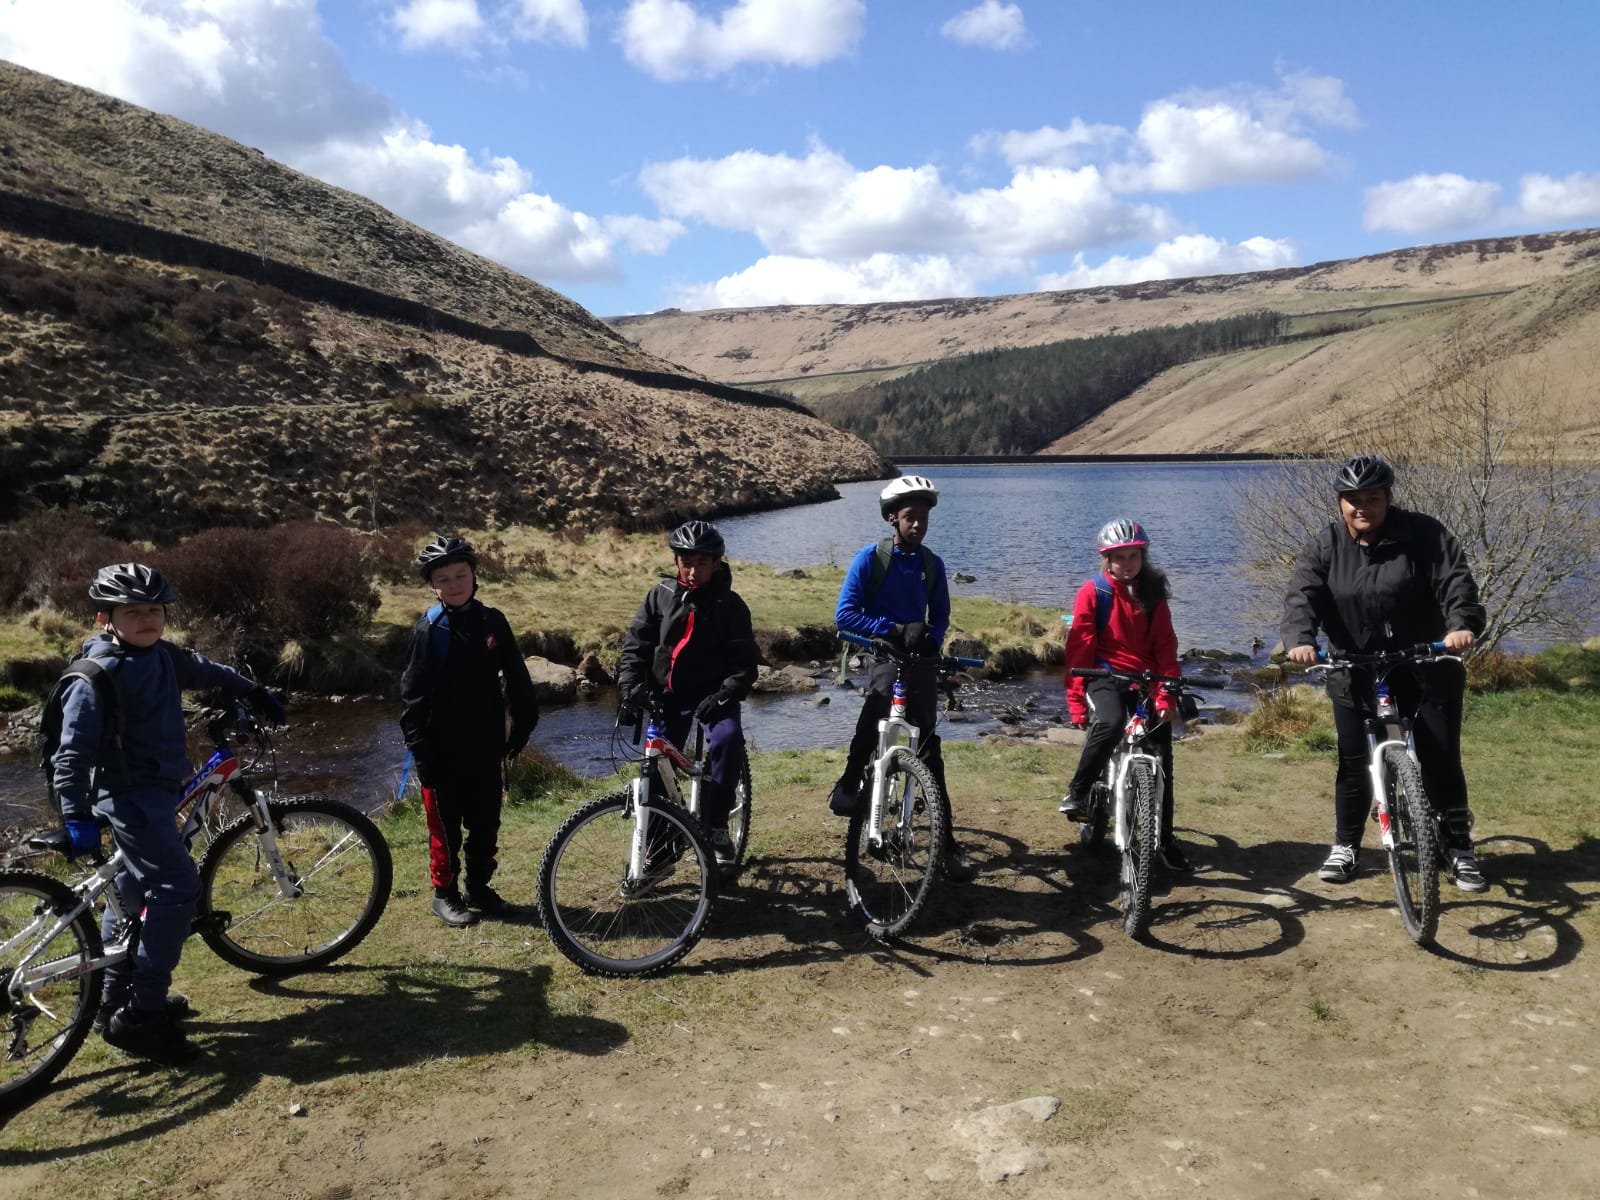 A group of young people get ready to set off on a mountain bike ride.